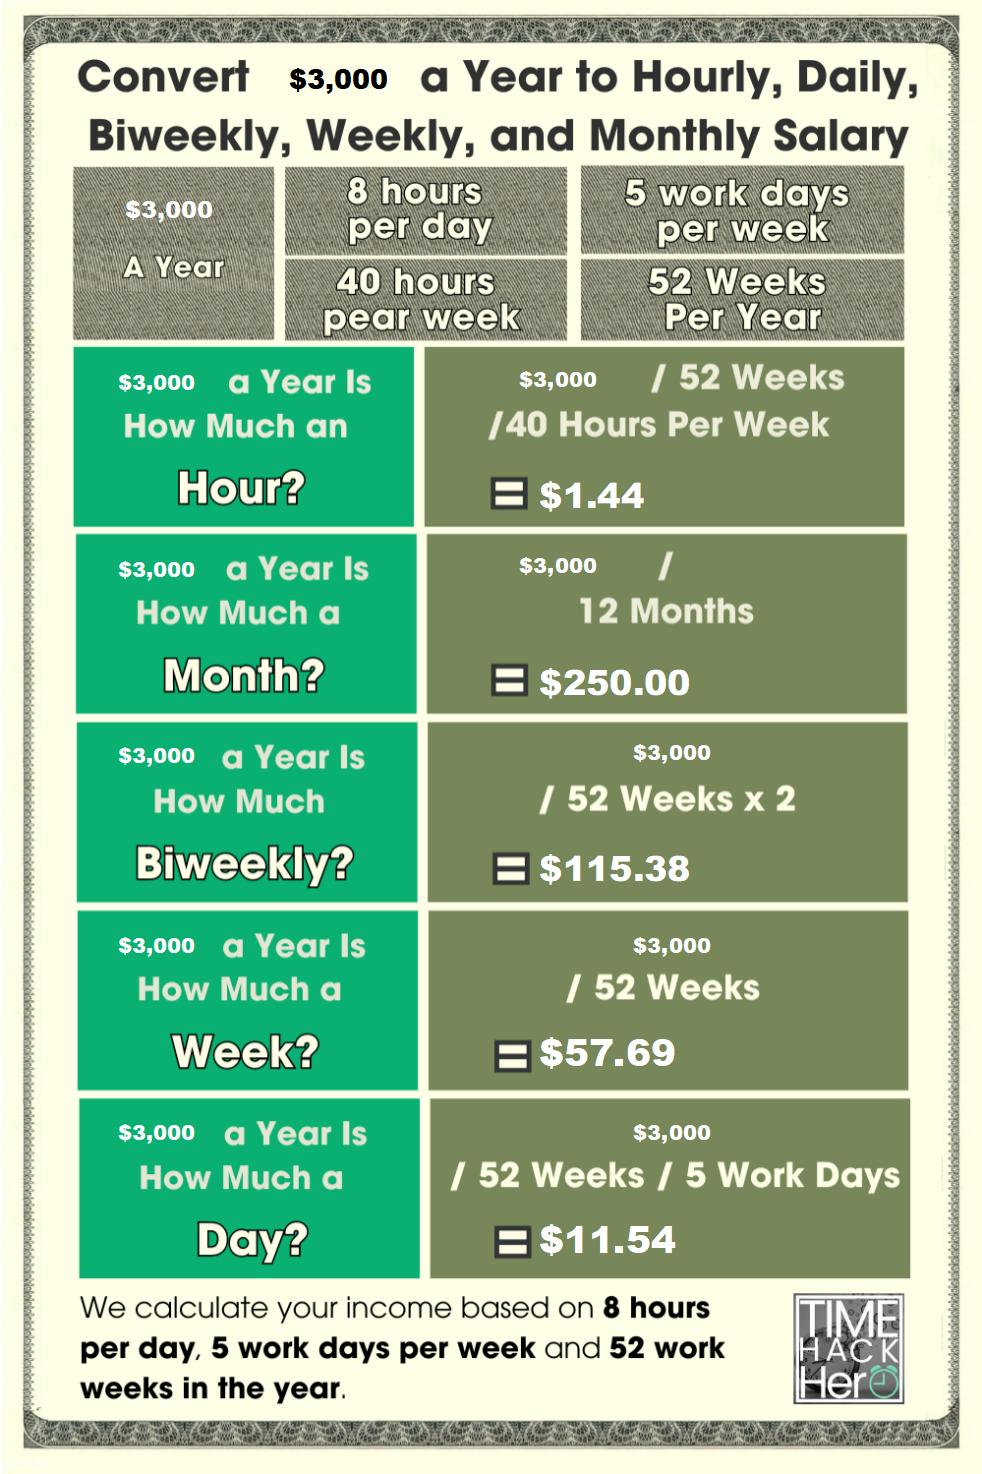 Convert $3000 a Year to Hourly, Daily, Biweekly, Weekly, and Monthly Salary